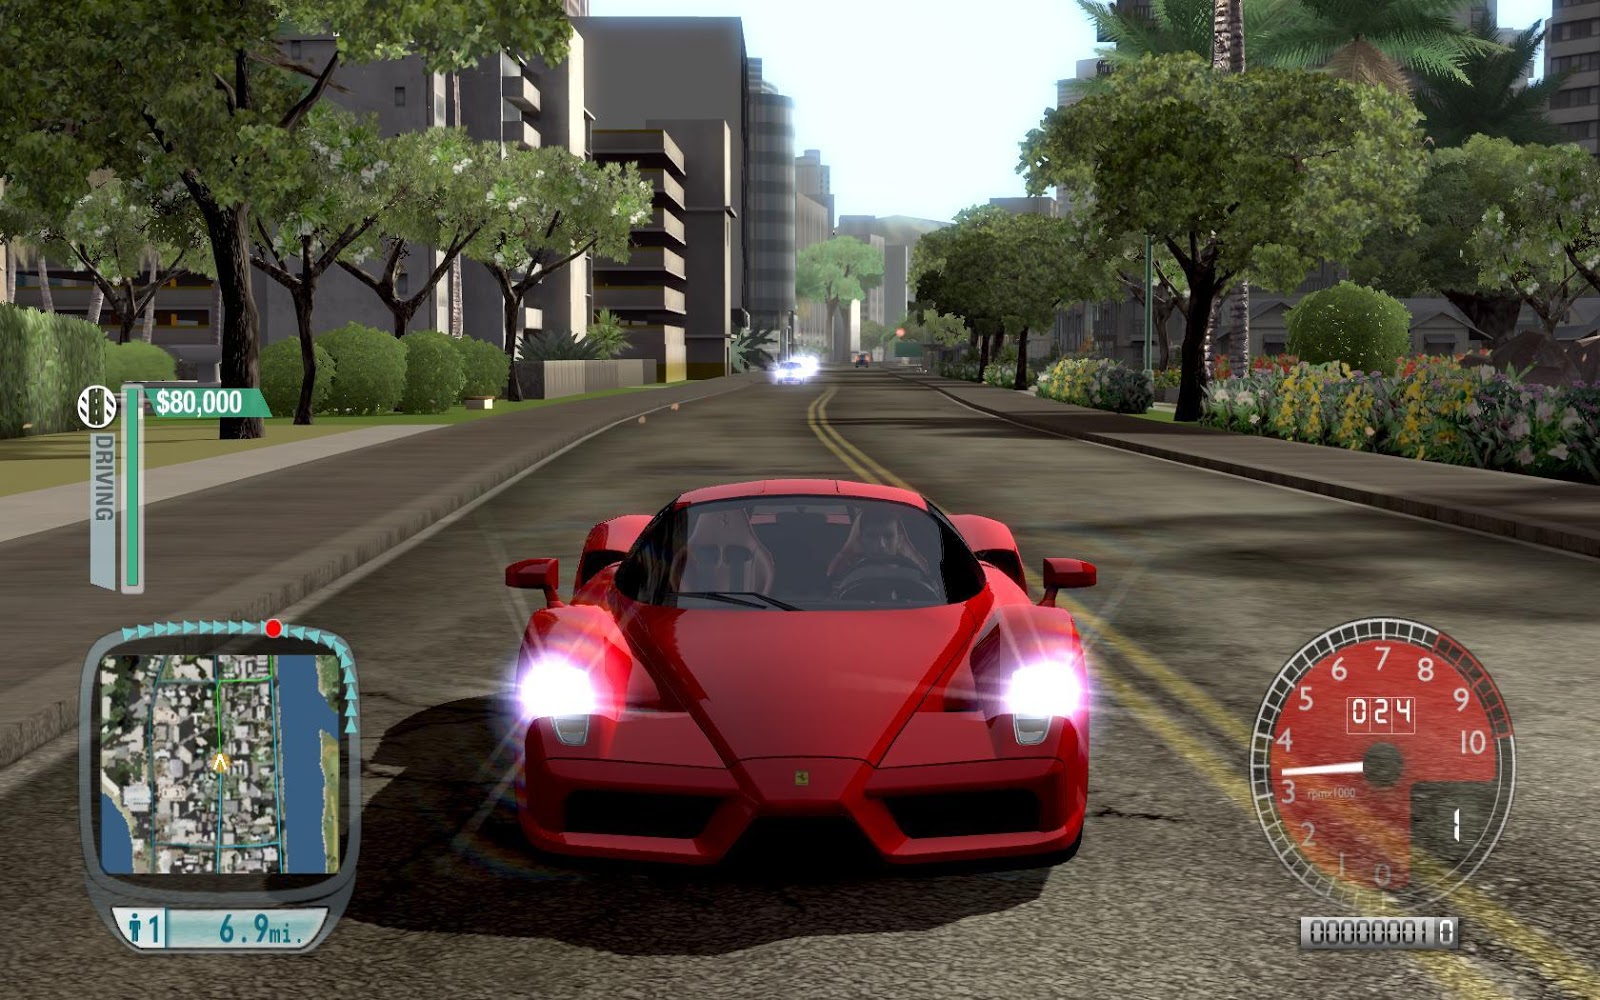 test drive unlimited 1 download